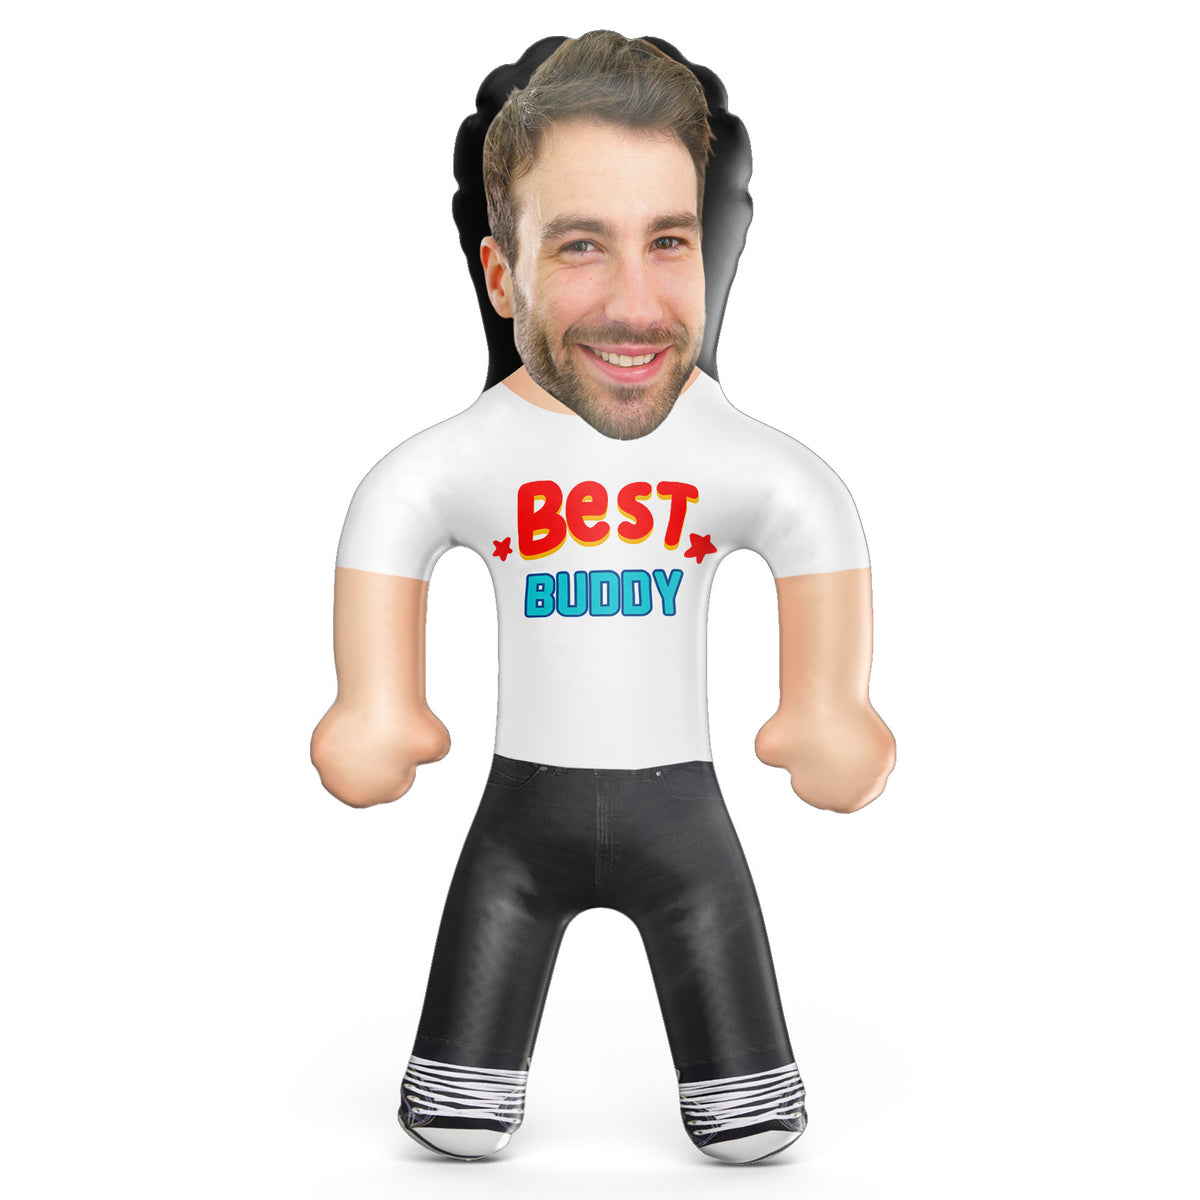 Best Buddy Inflatable Doll - Best Buddy Blow Up Doll